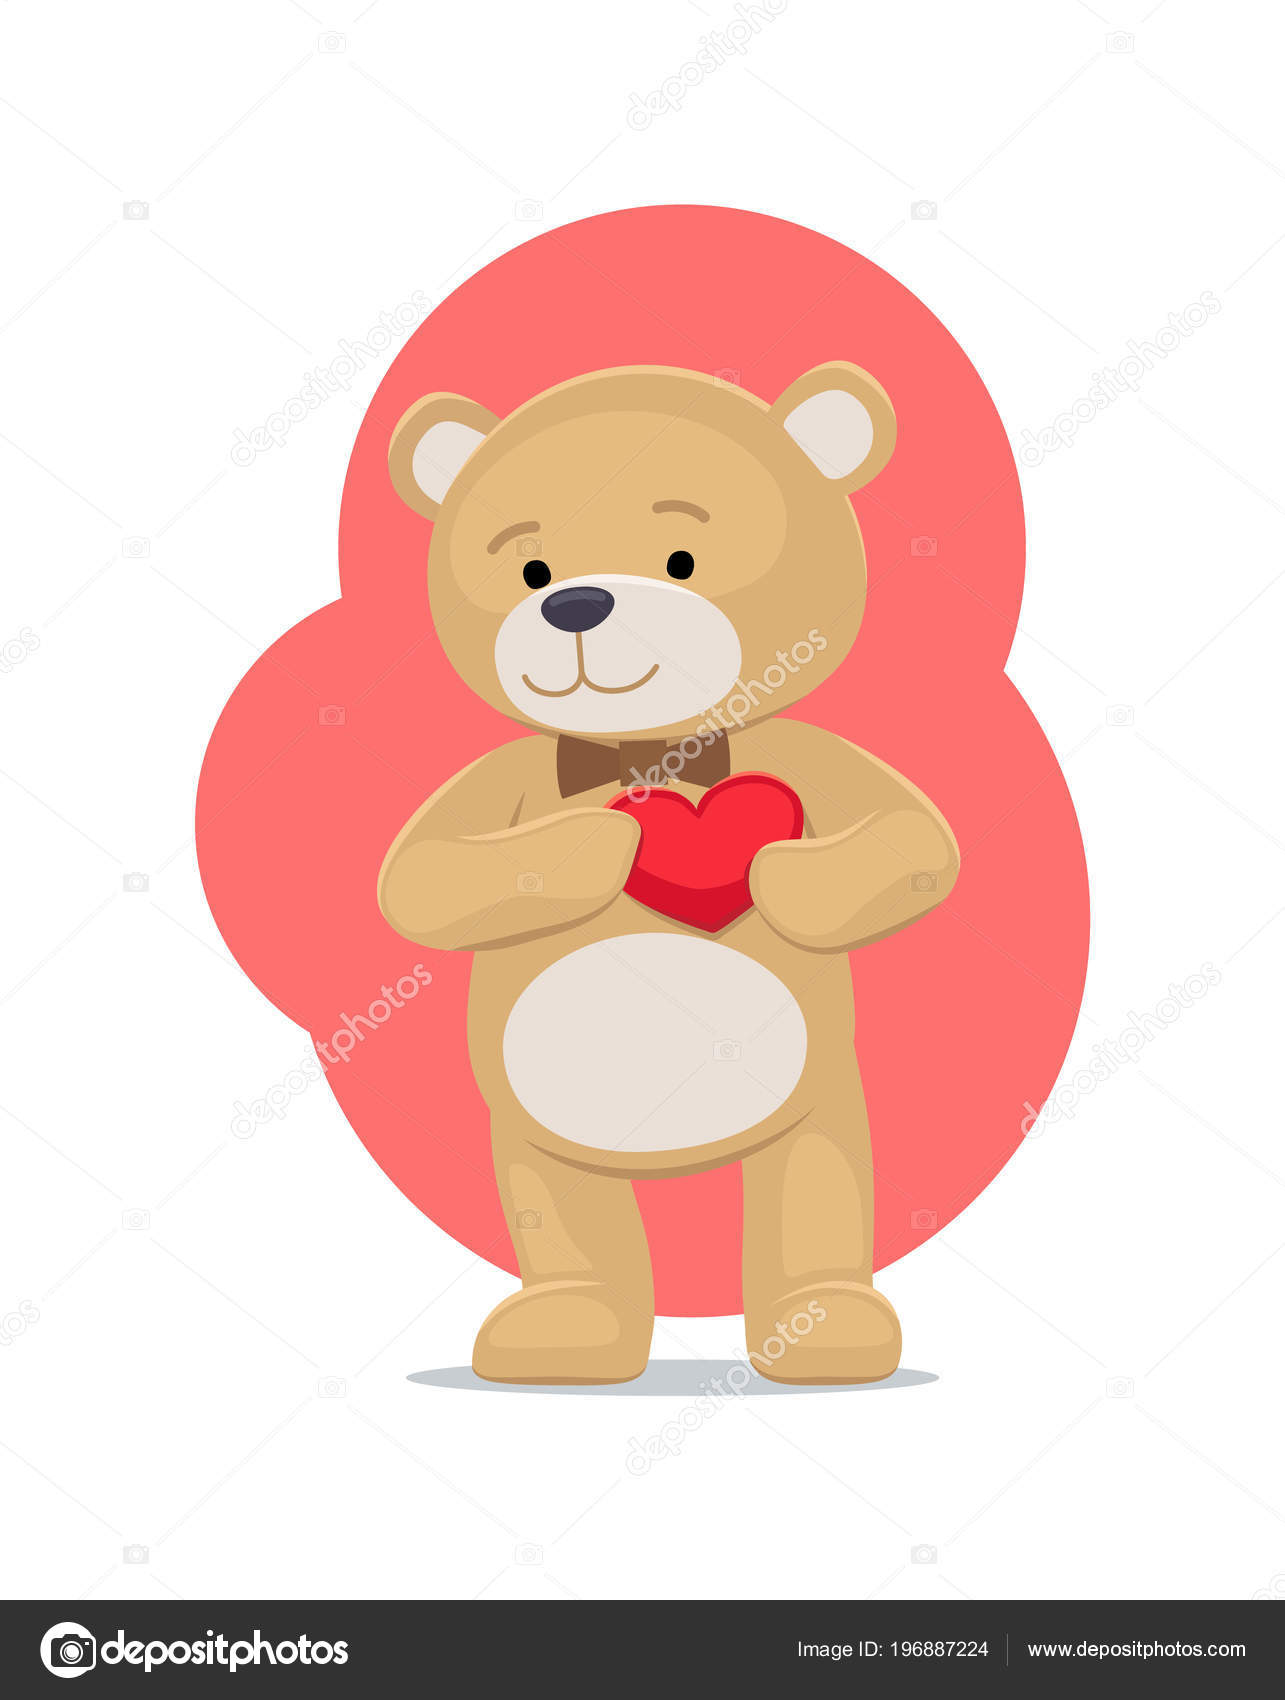 Adorable Teddy Gently Holds Heart on 